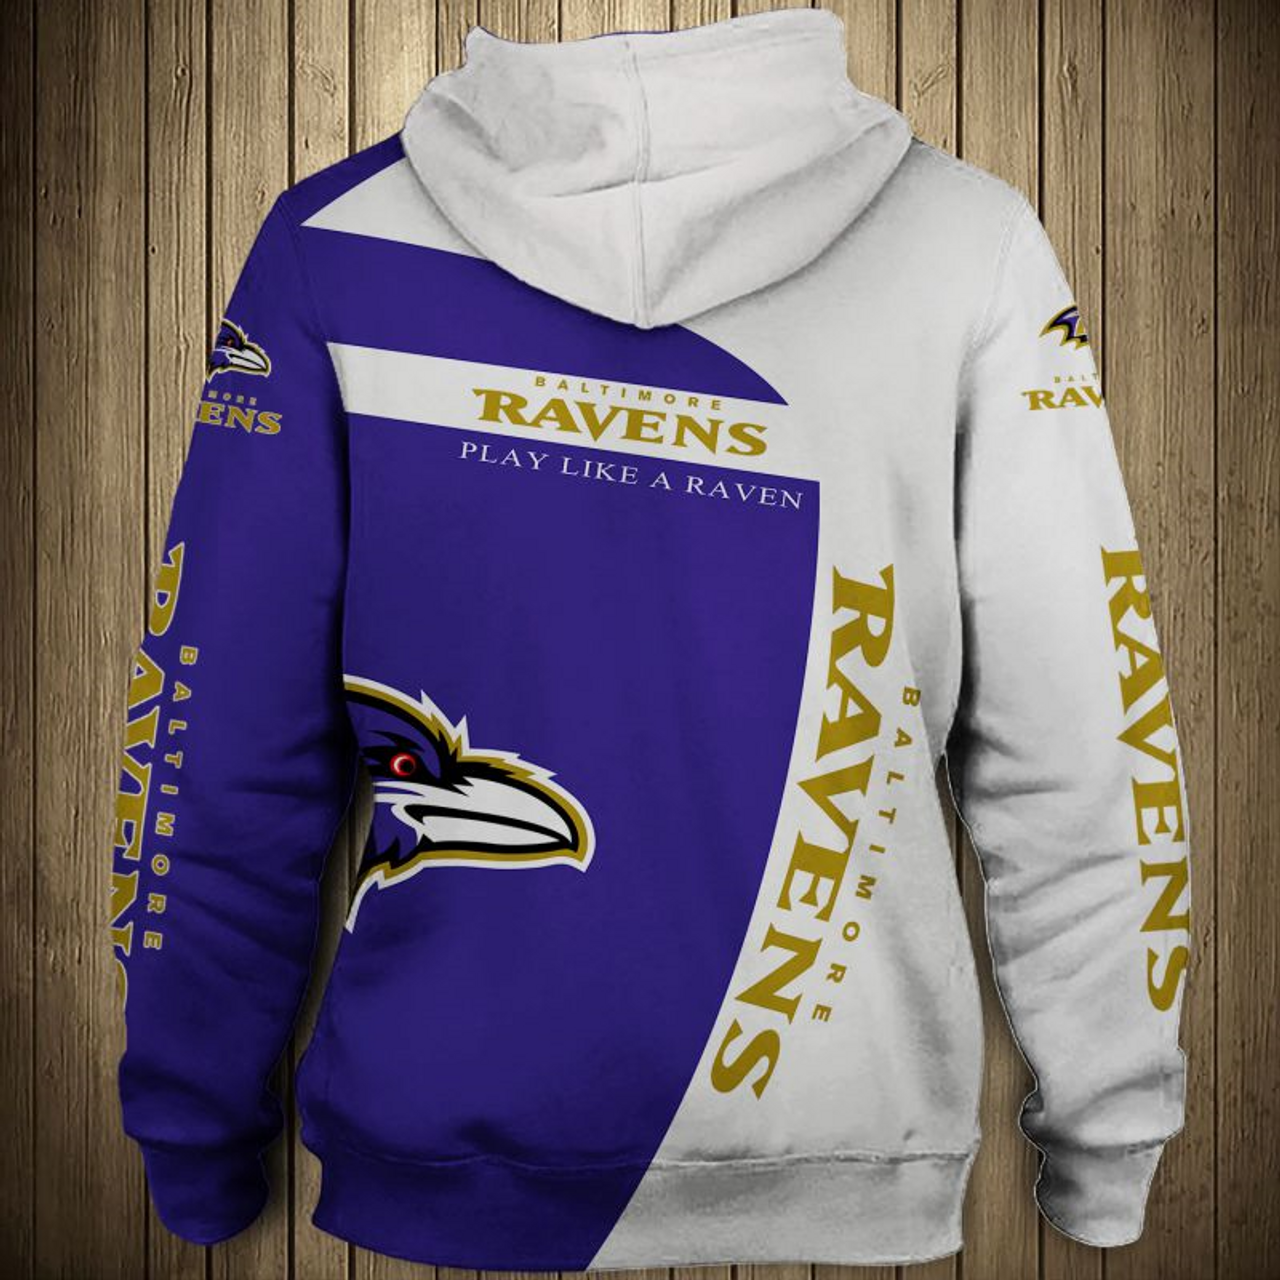 **(OFFICIAL-N.F.L.BALTIMORE-RAVENS-FASHION-PULLOVER-TEAM-HOODIES/CUSTOM-3D-GRAPHIC-PRINTED-DETAILED-DOUBLE-SIDED-ALL-OVER/CLASSIC-OFFICIAL-RAVENS-LOGOS & RAVENS-OFFICIAL-TEAM-COLORS/WARM-PREMIUM-OFFICIAL-N.F.L.RAVENS-TEAM-FAN-PULLOVER-HOODIES)**